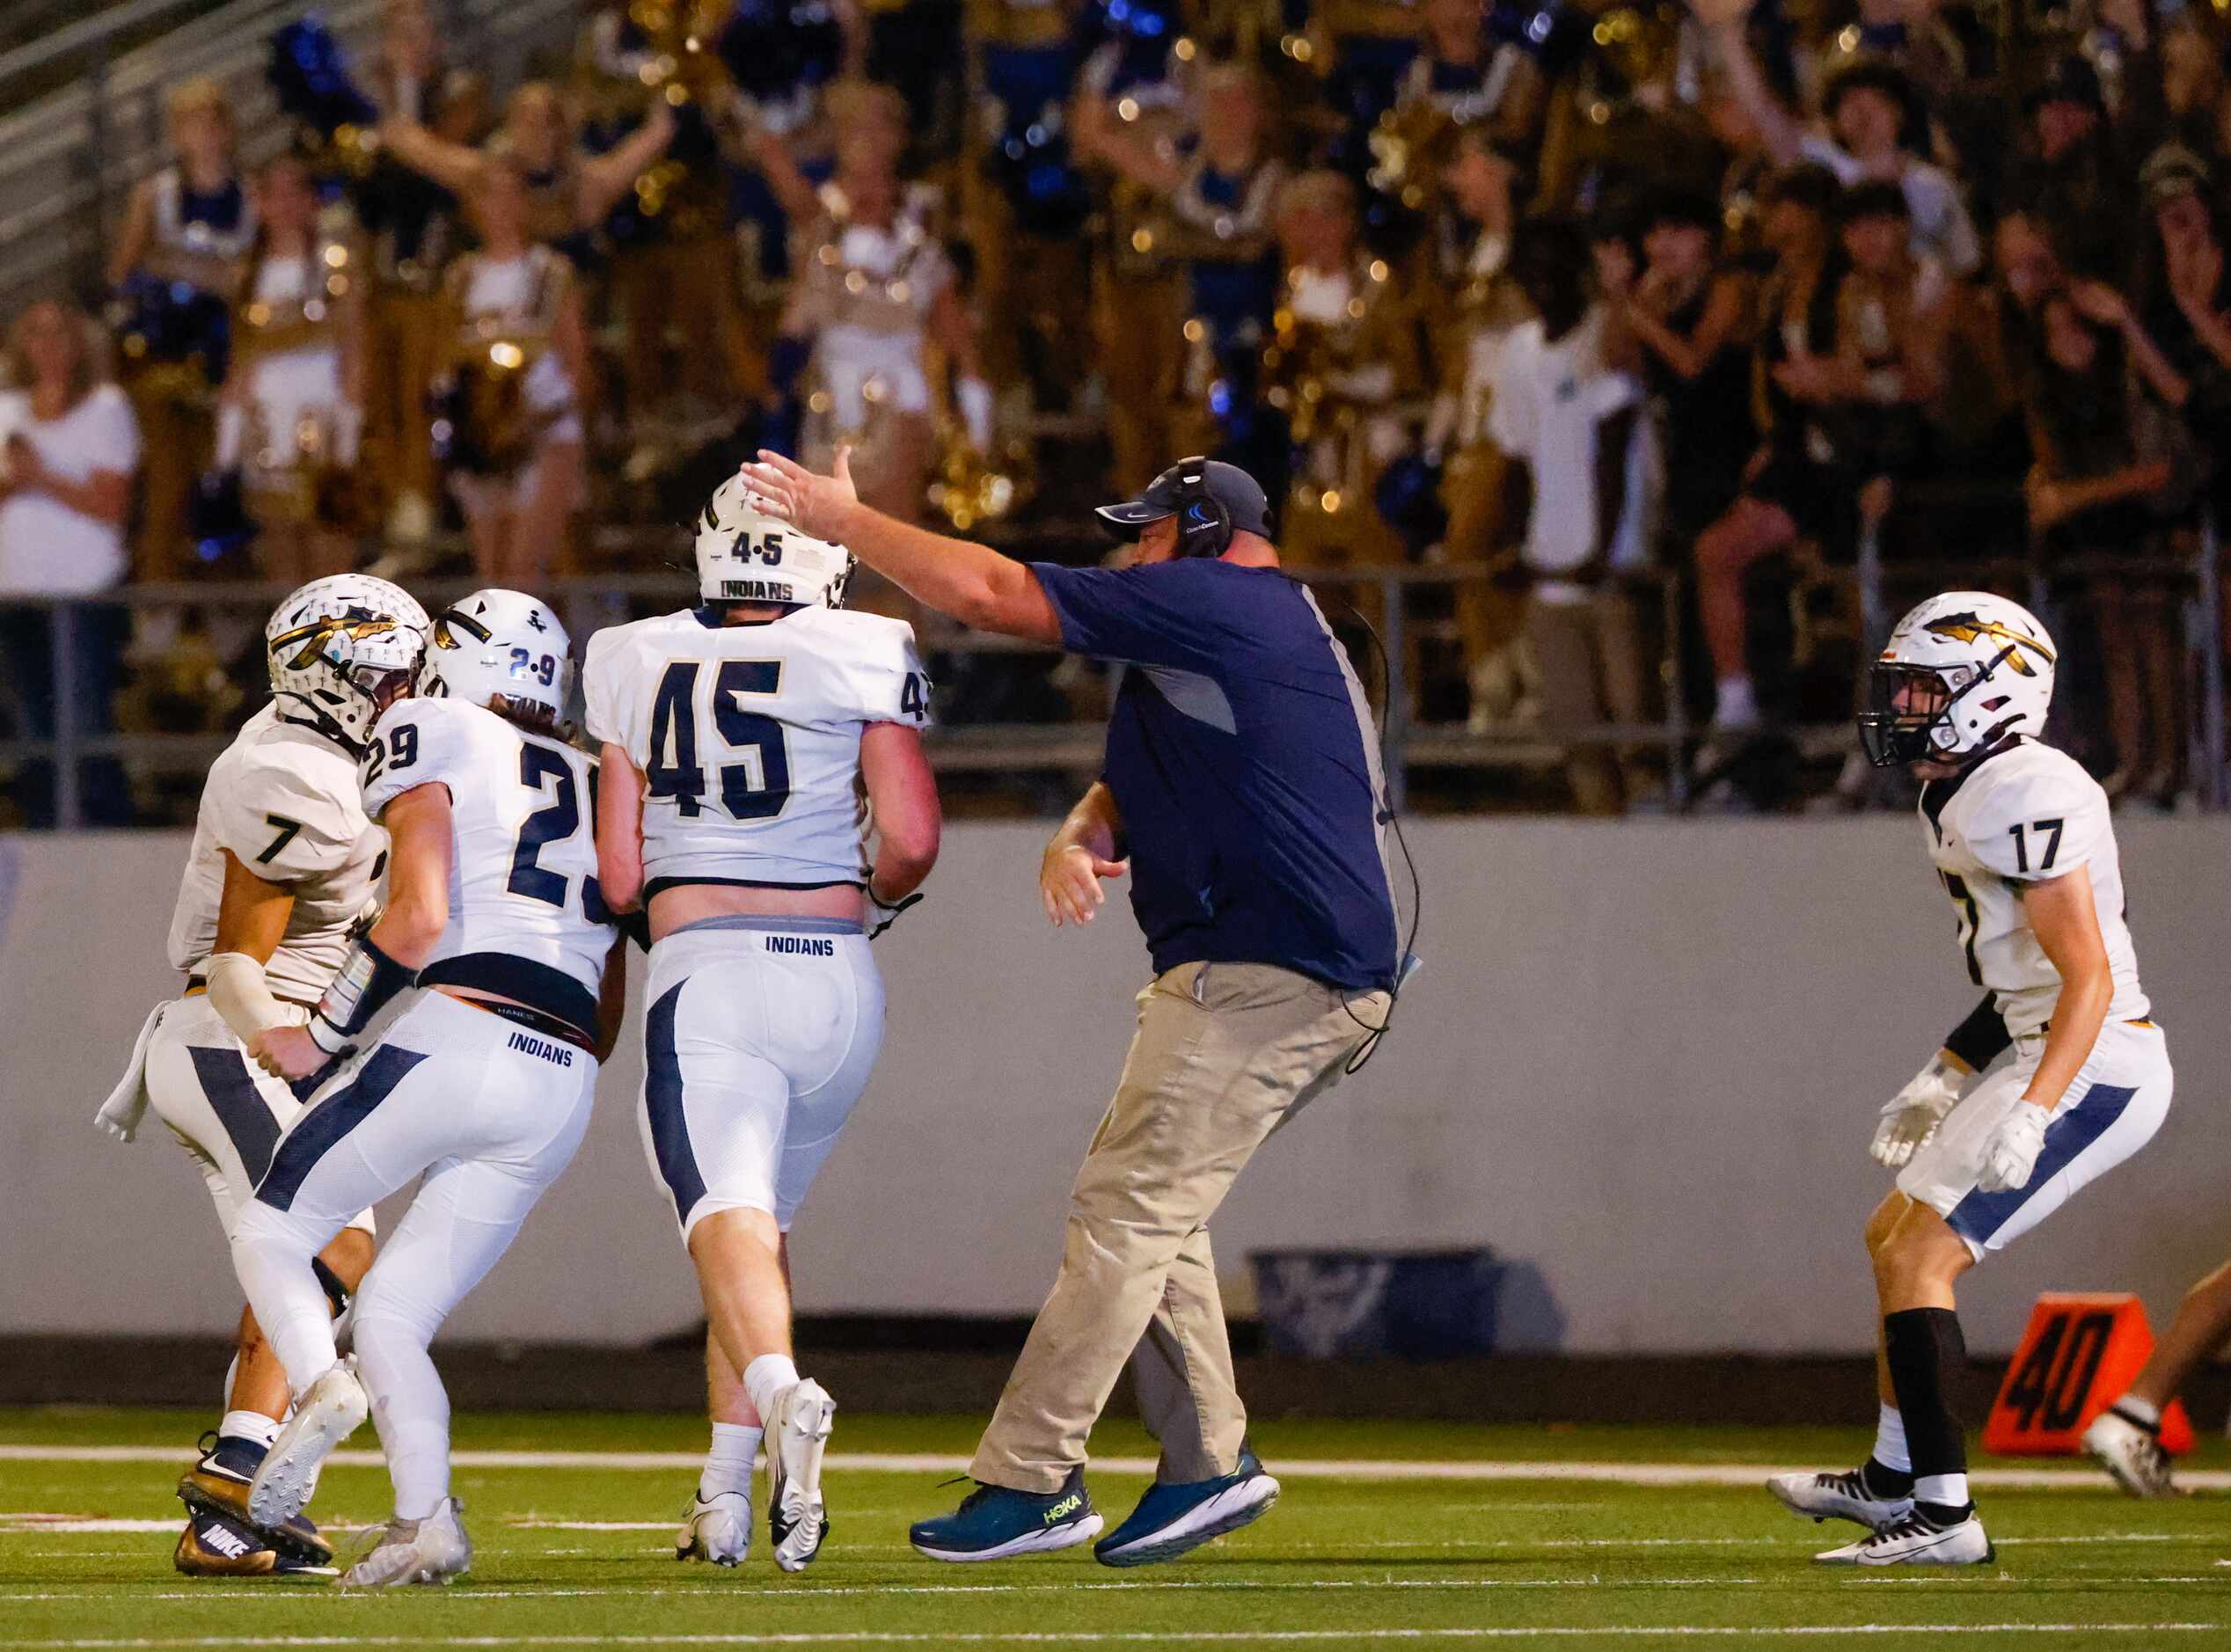 Keller High School defensive line Ethan Starr (45) receives a hit on his helmet from a coach...